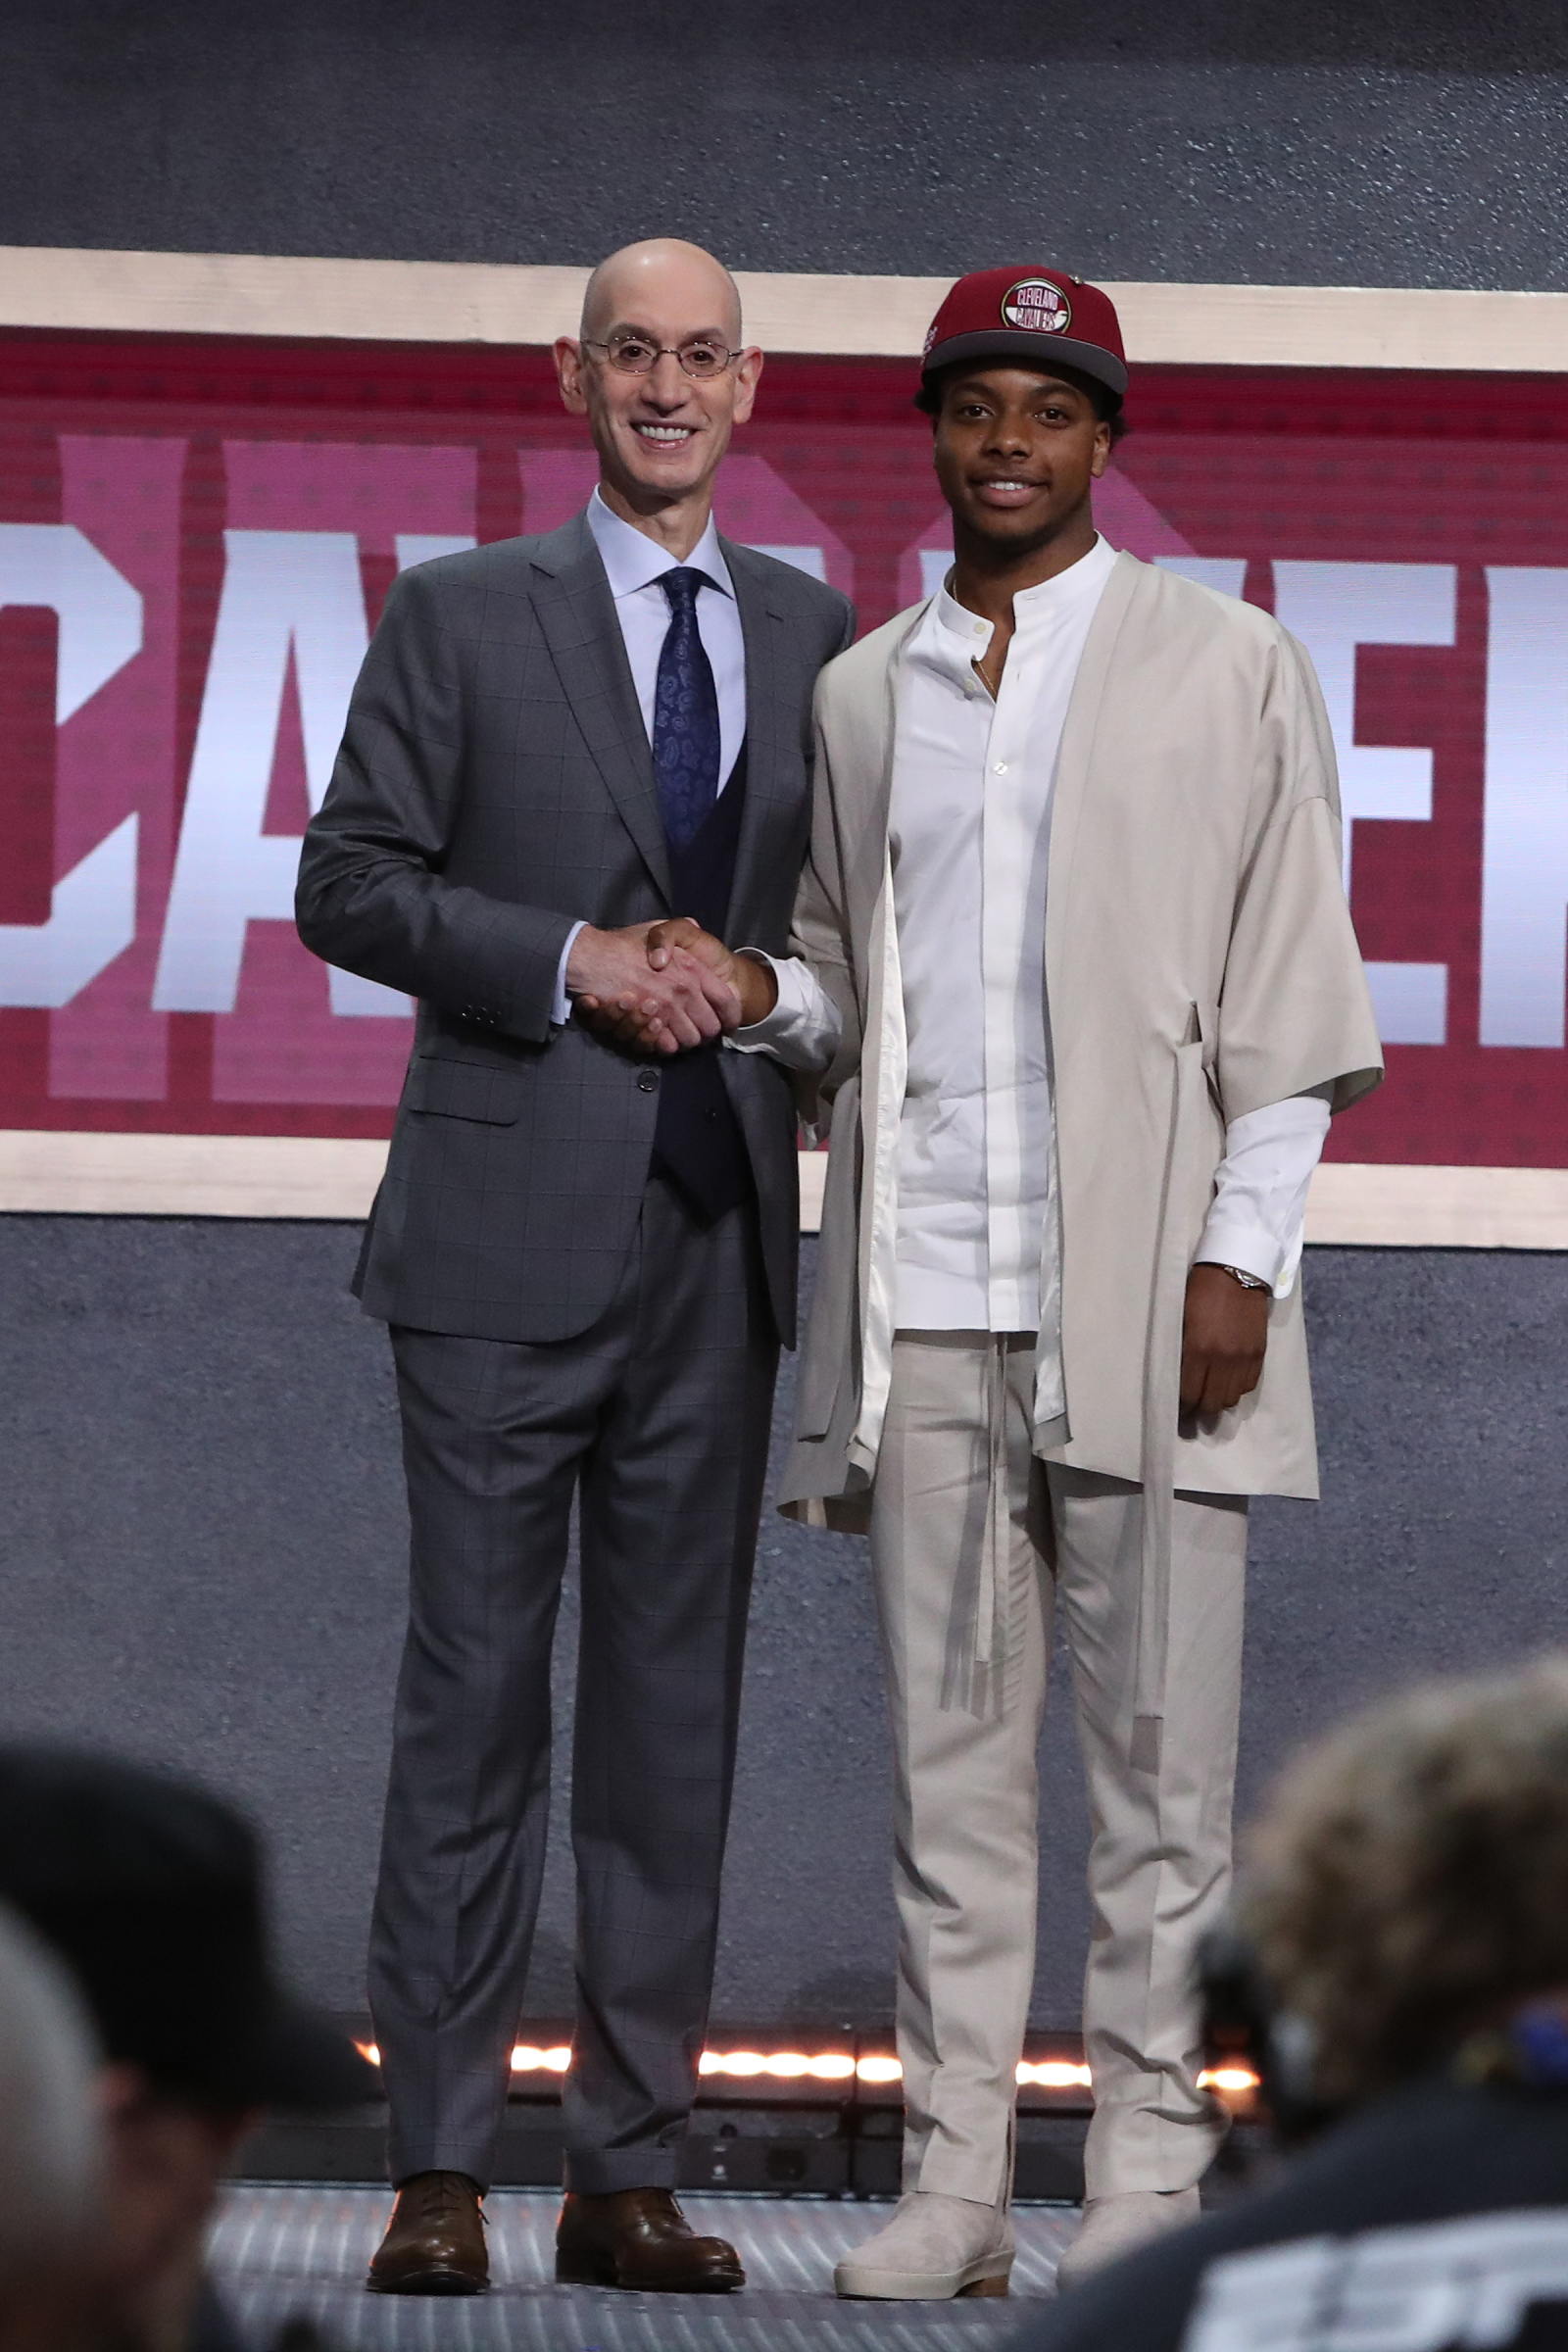 With Darius Garland, the N.B.A.'s 'Three-Player' Draft Now Has